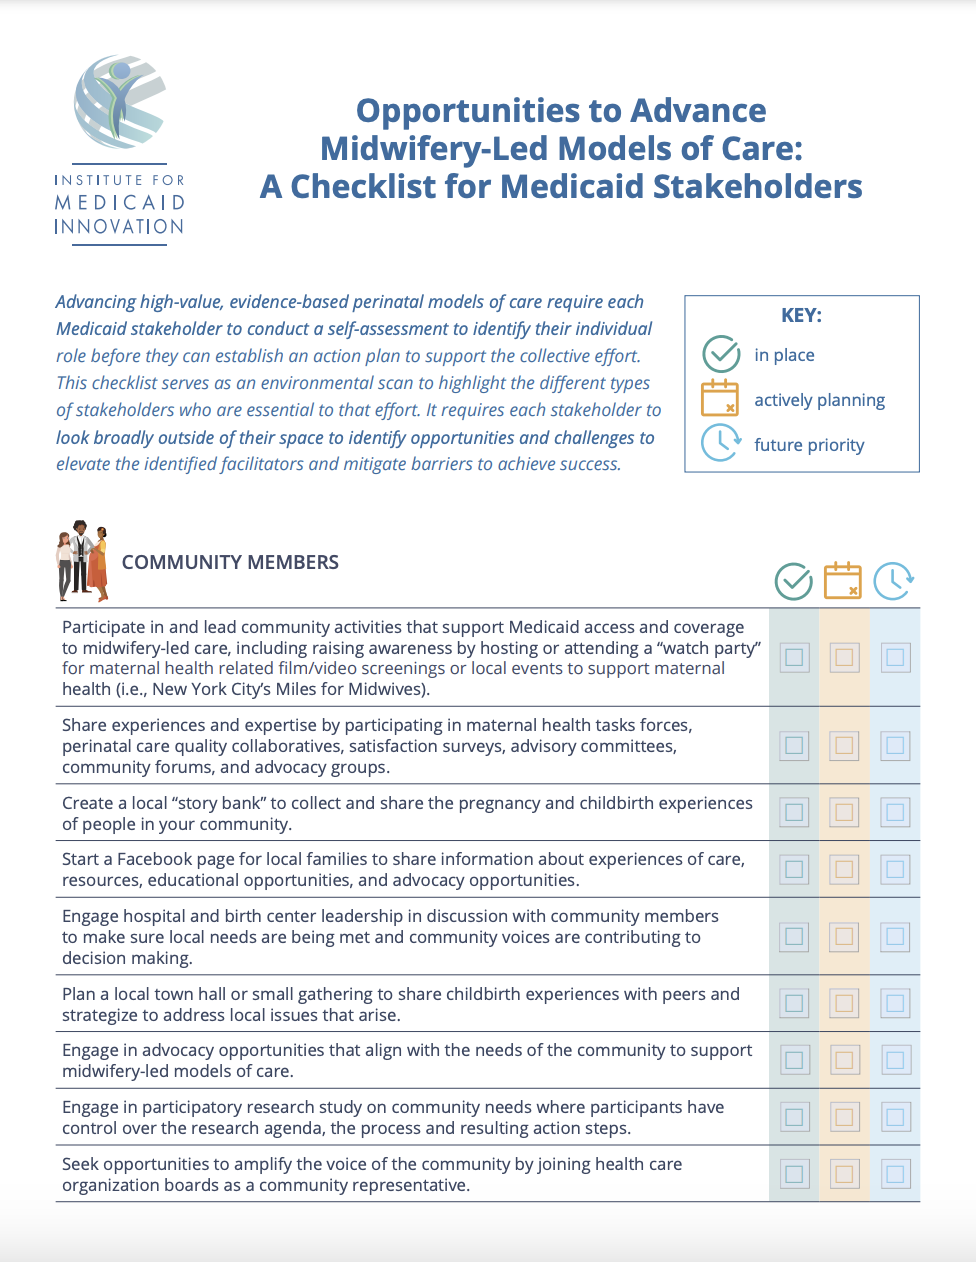 Checklist for Medicaid Stakeholders